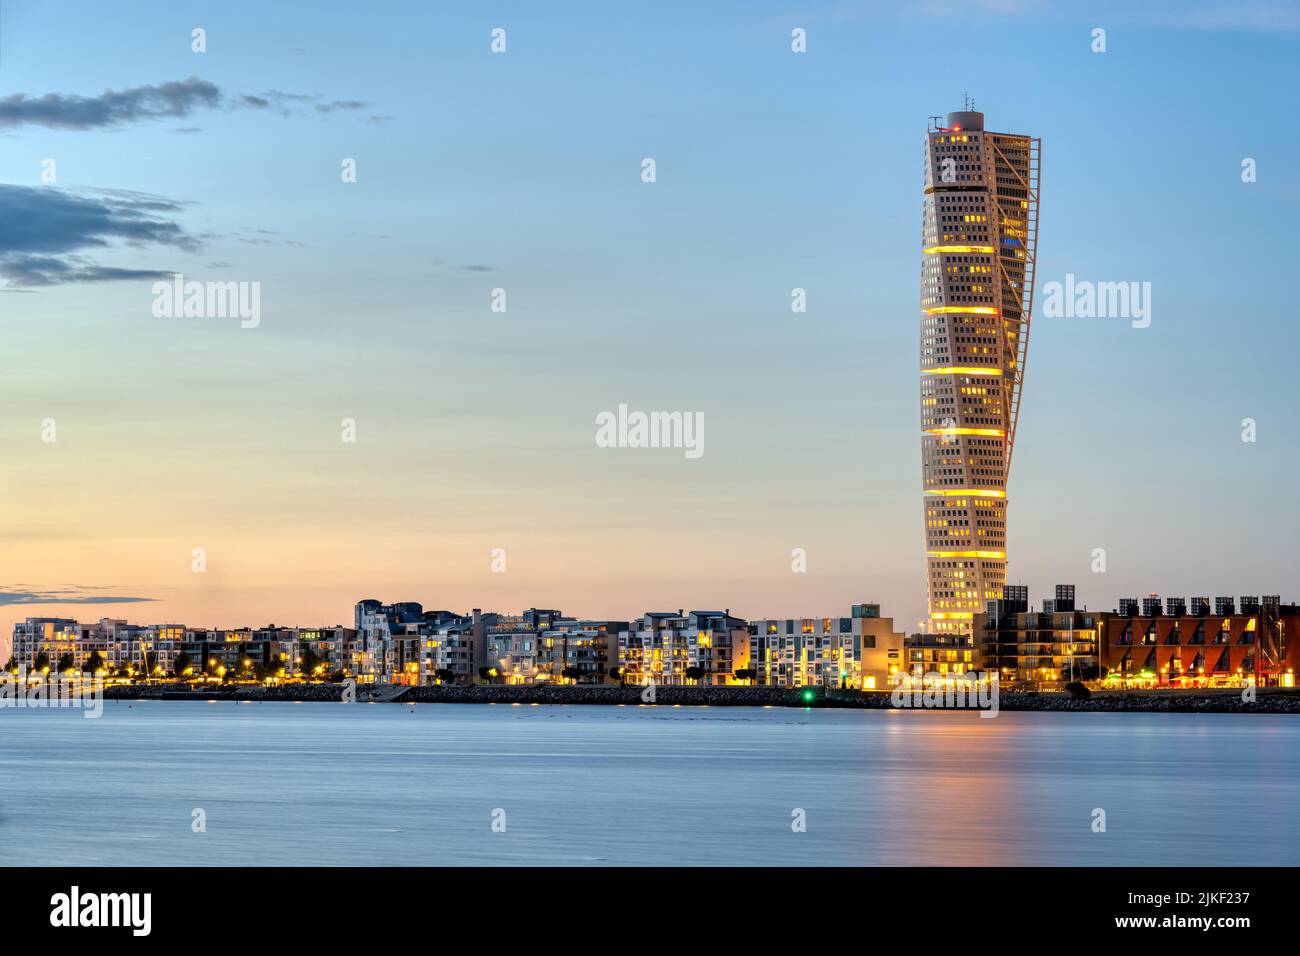 The Turning Torso in in Malmo, Sweden, at dusk Stock Photo